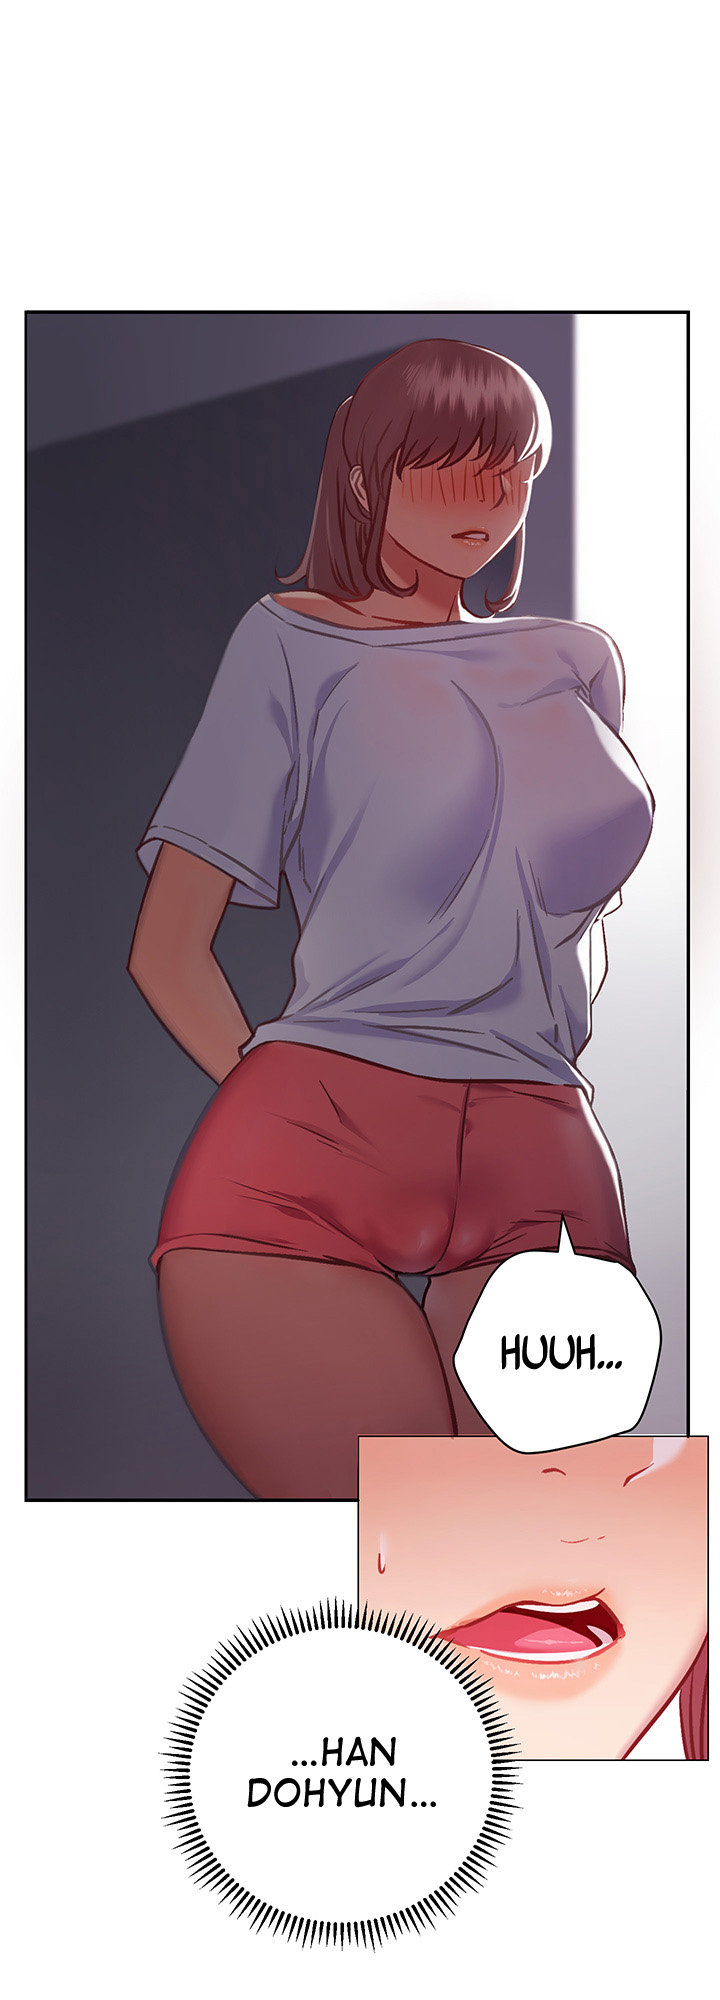 How About This Pose? - Chapter 7 Page 16